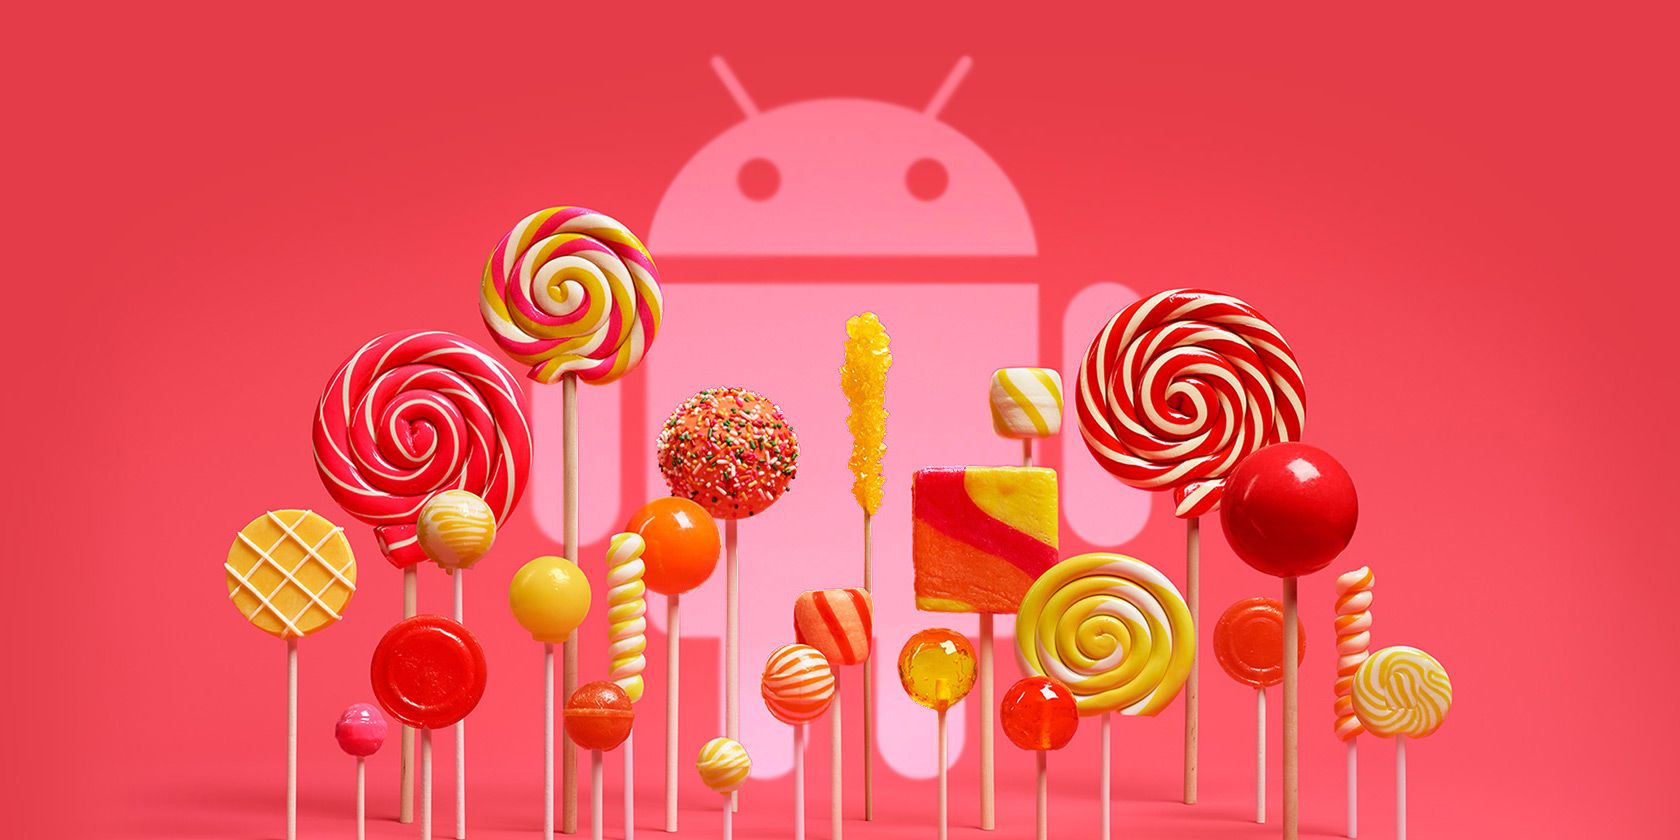 privacy guard android lollipop